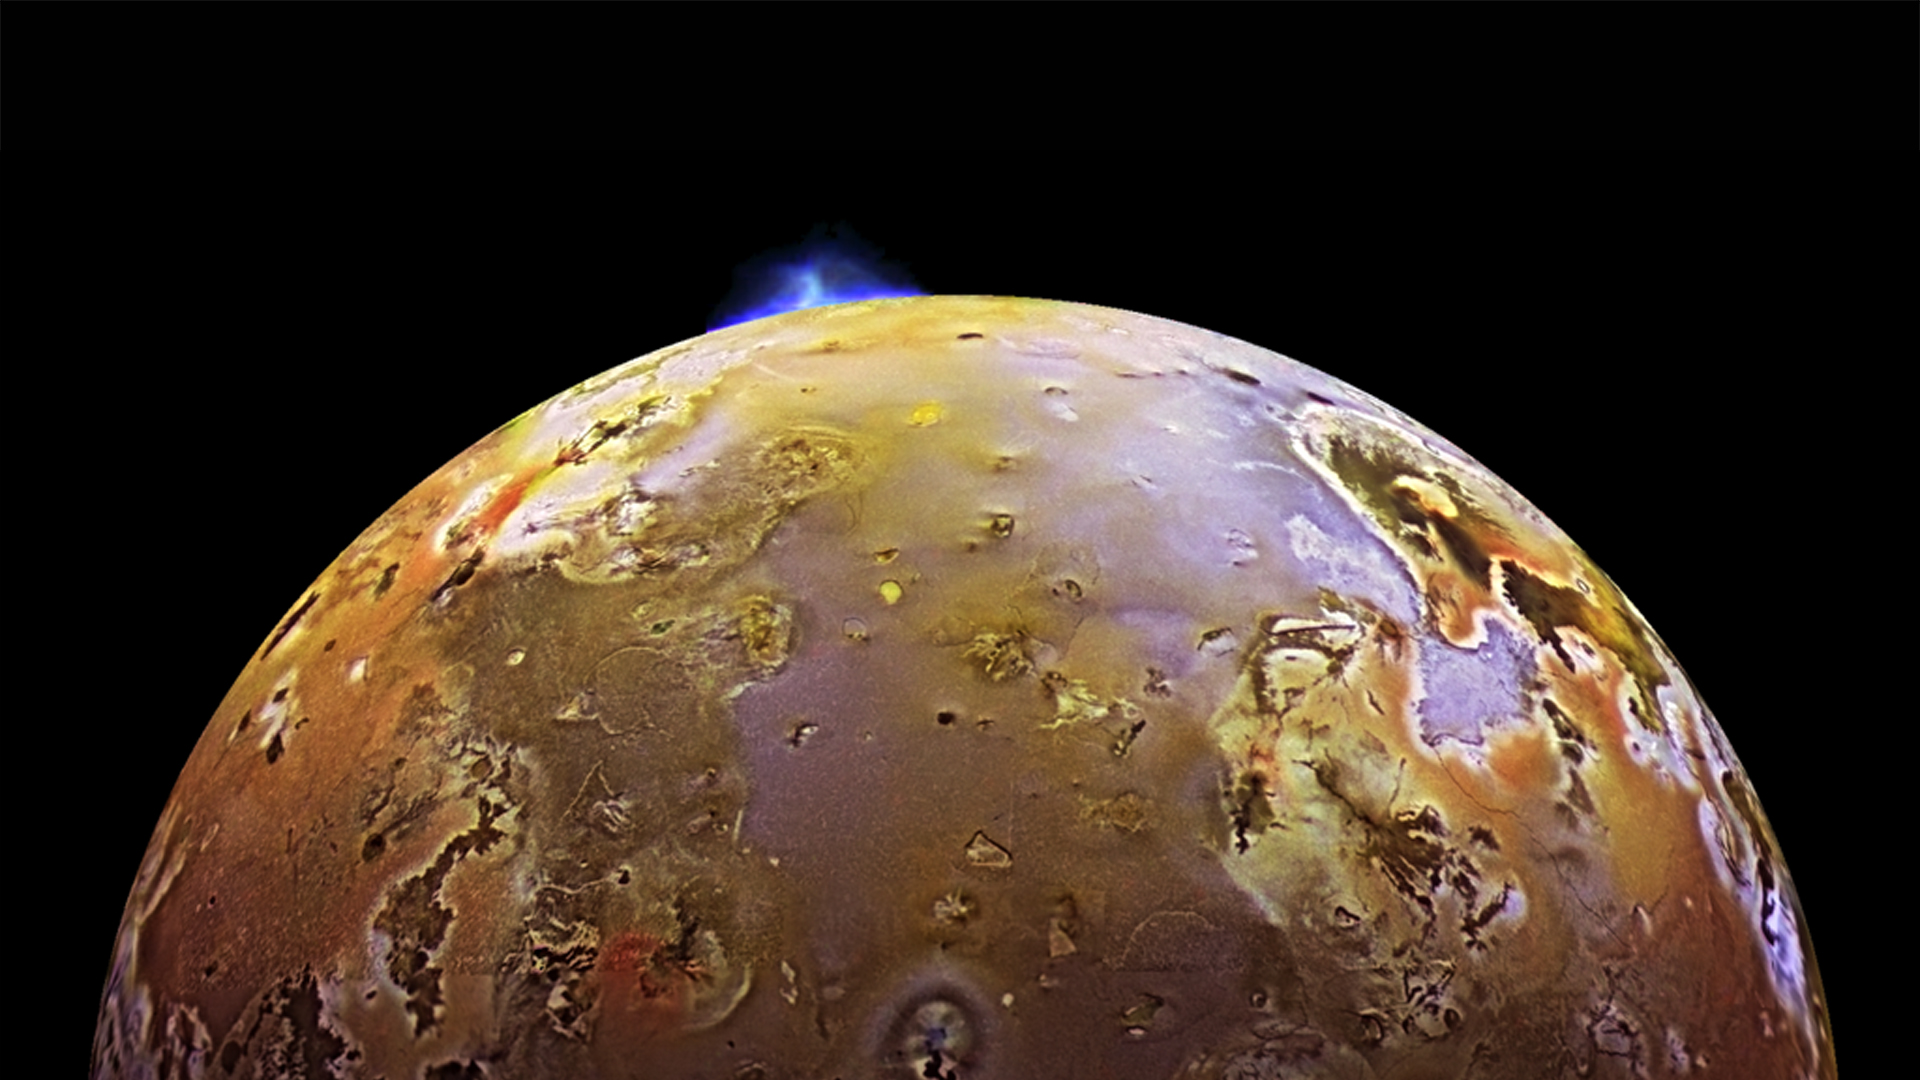 Io has hundreds of active volcanoes. Here, an impressive eruption was captured by NASA’s Galileo spacecraft during a flyby.